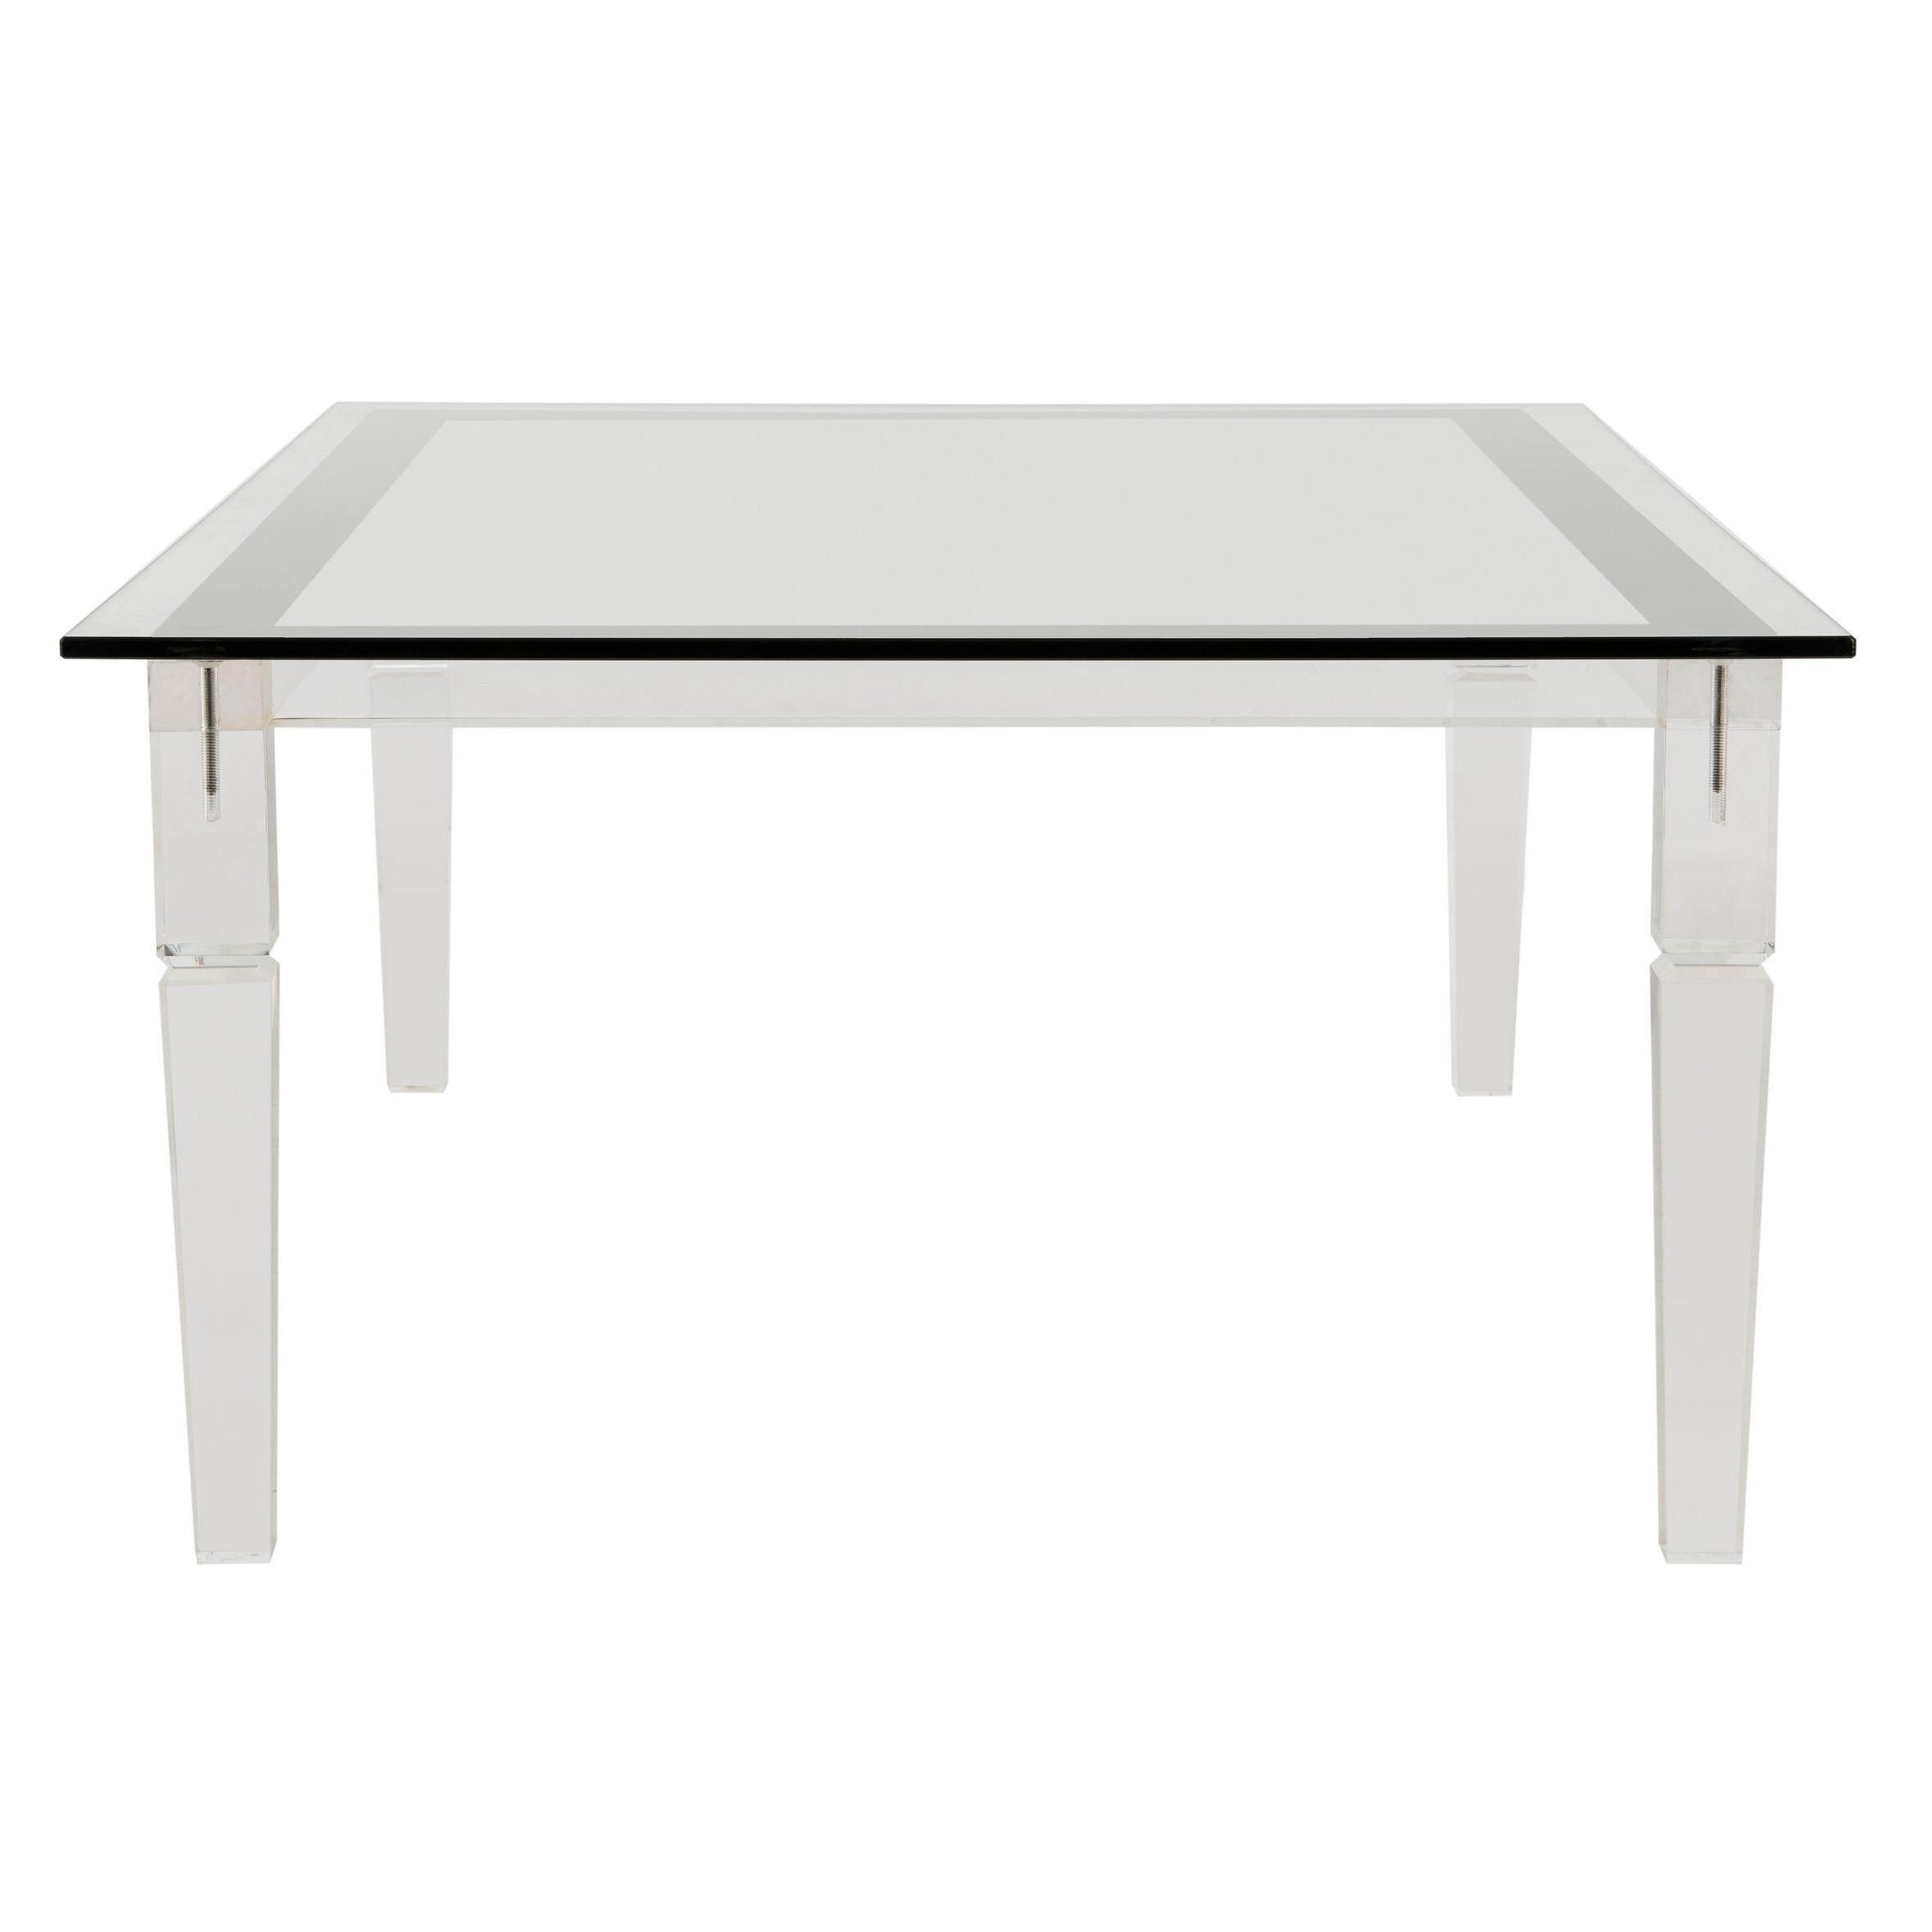 Safavieh Couture Amelie Acrylic Coffee Table – Clear – 48" X 30" X 16" Intended For Most Recent Safavieh Couture Gianna Glass Coffee Tables (View 18 of 20)